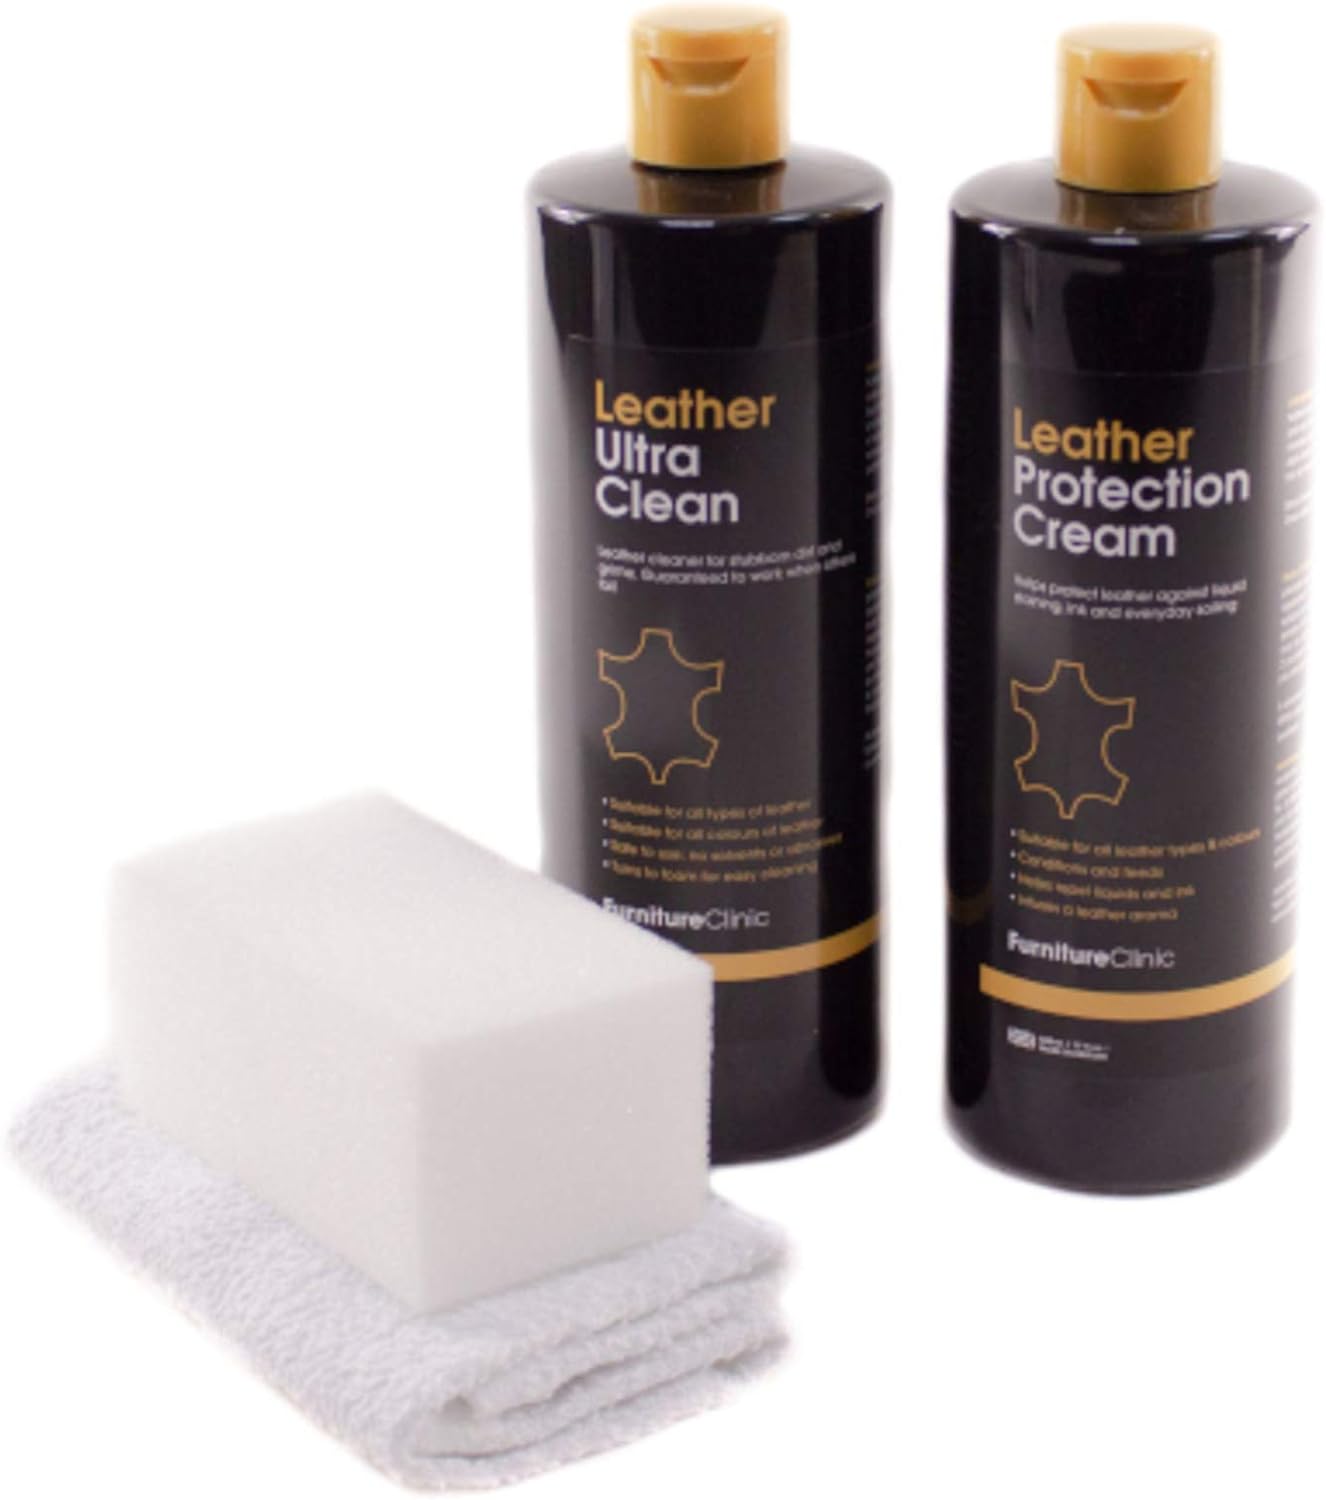 Complete Leather Care Kit | Leather Cleaner & Protection Cream for Sofas, Cars, Furniture | Premium Set is Infused with a Leather Aroma and Includes the 500ml Ultra Clean & 500ml Leather Conditioner, Cloth & Sponge